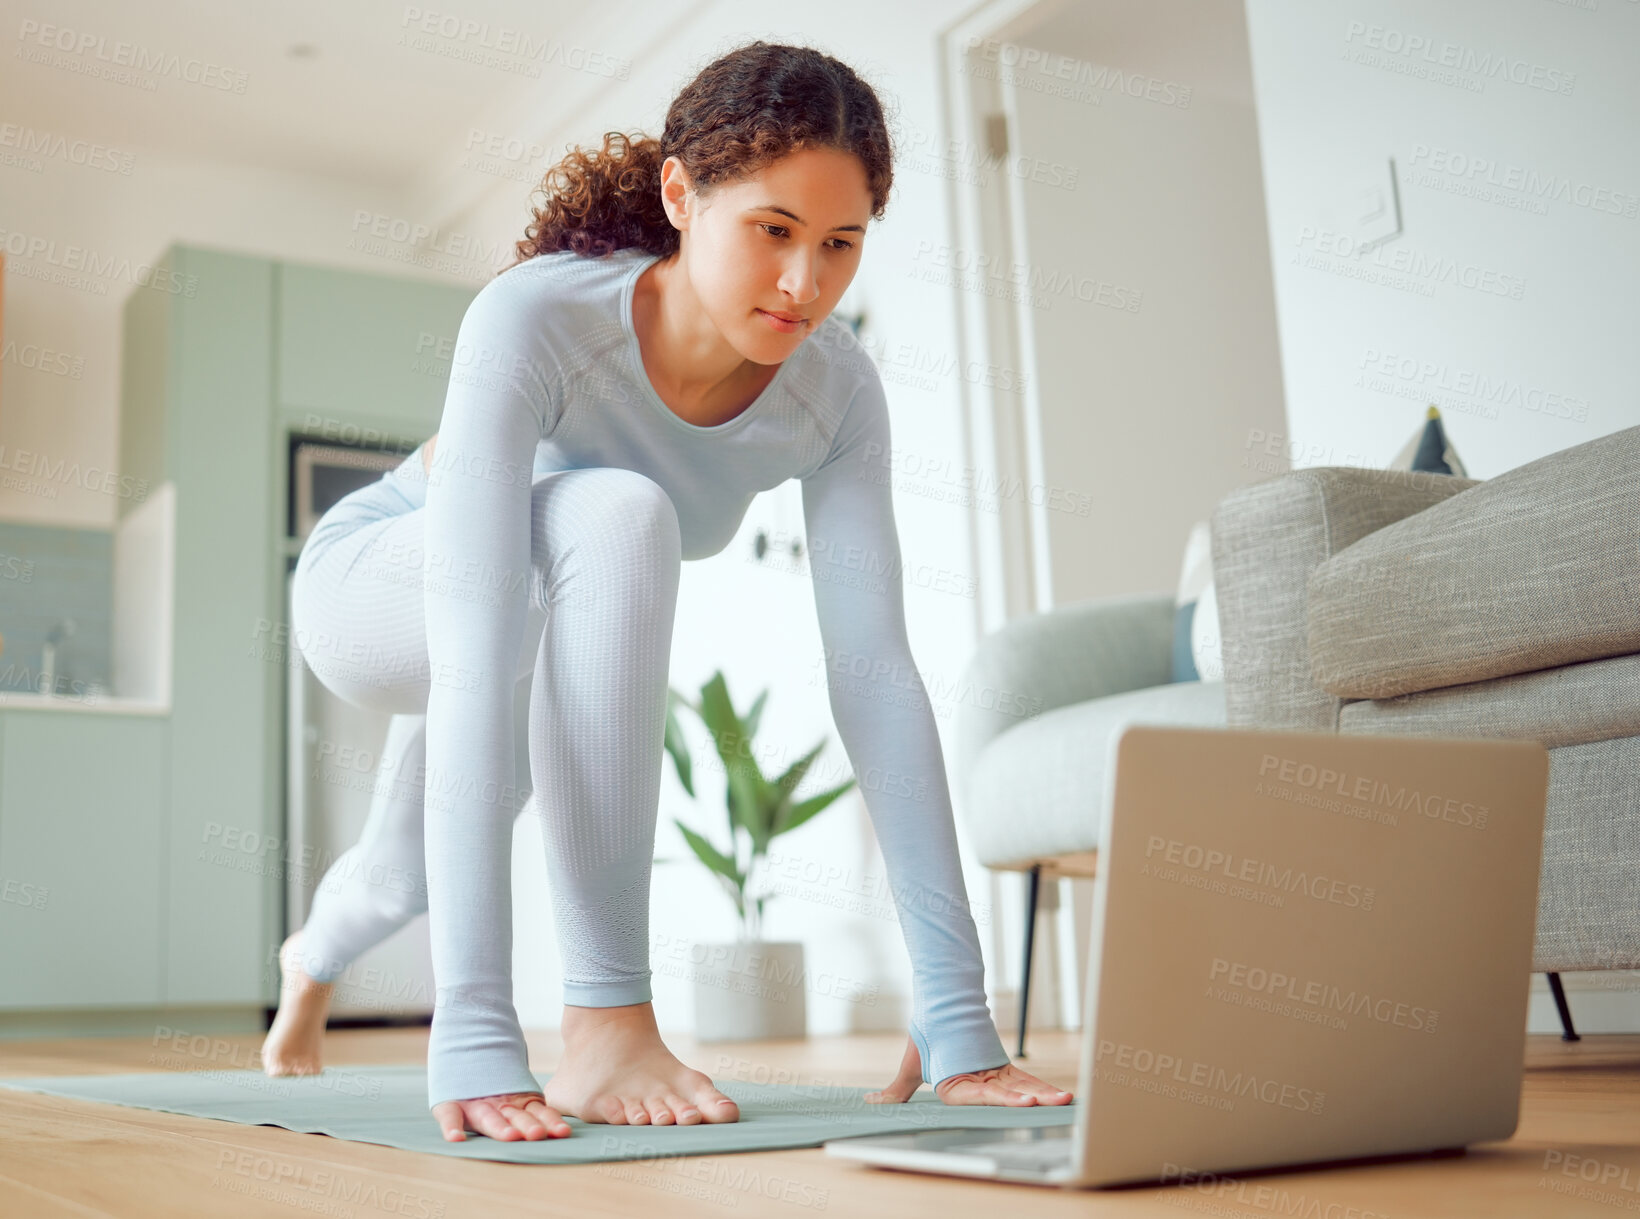 Buy stock photo Beautiful young mixed race woman using a laptop to follow an online class while practicing yoga at home. Hispanic female exercising her body and mind, finding inner peace, balance and clarity